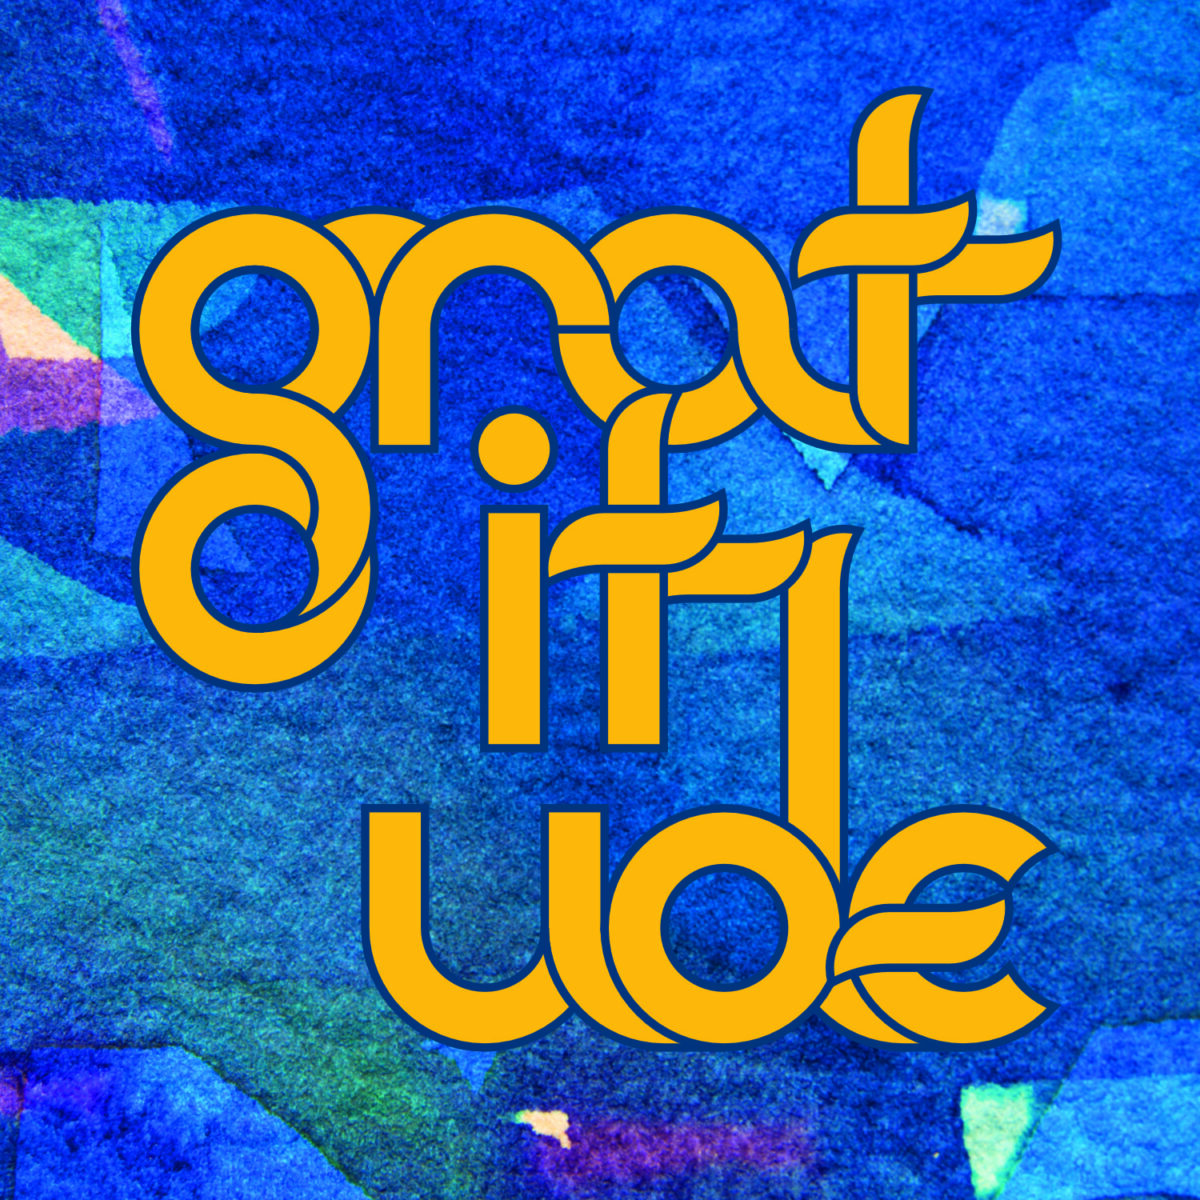 The word gratitude, broken down into syllables grat- it- ude in orange-yellow on a blue-green-purple background